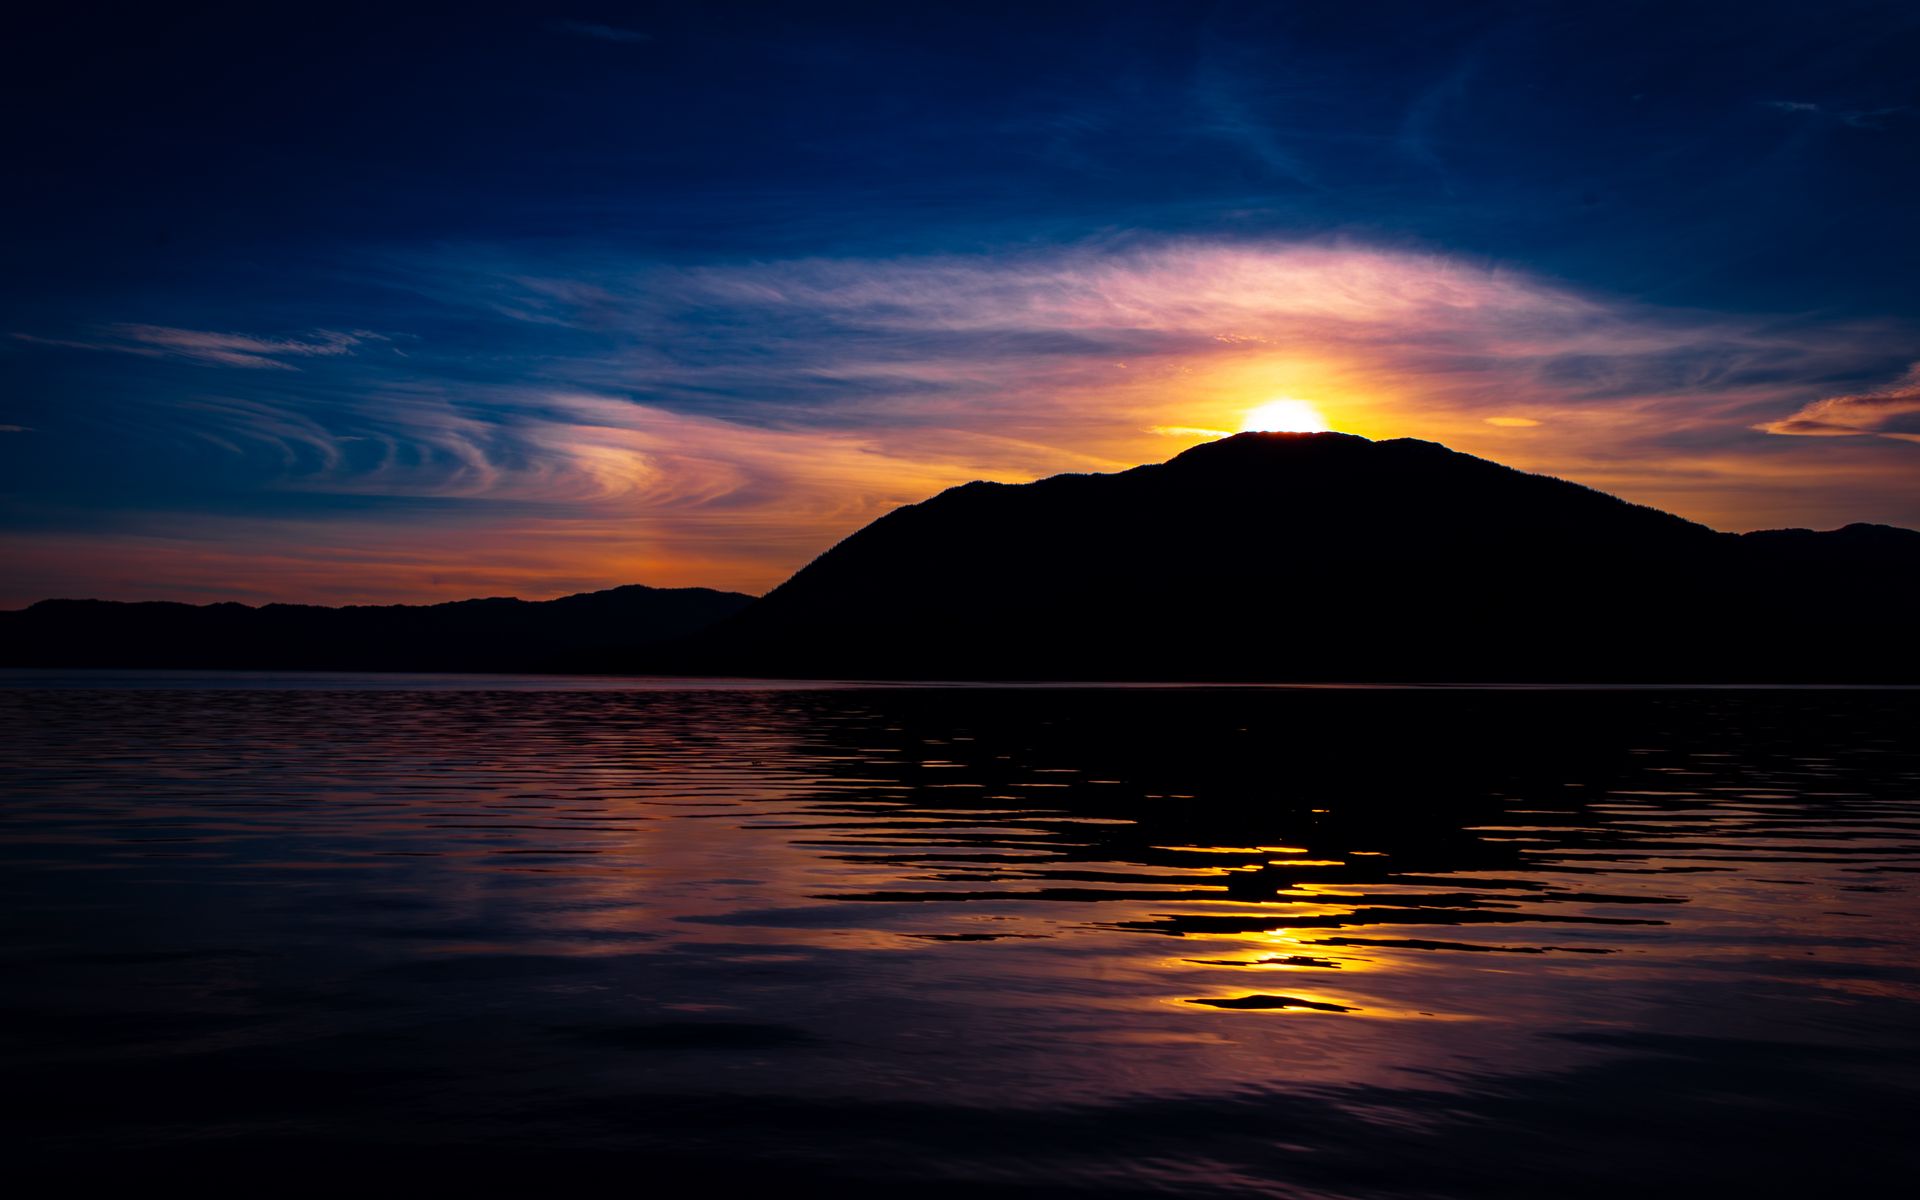 Download wallpaper 1920x1200 mountain, hill, silhouette, sea, sunset ...